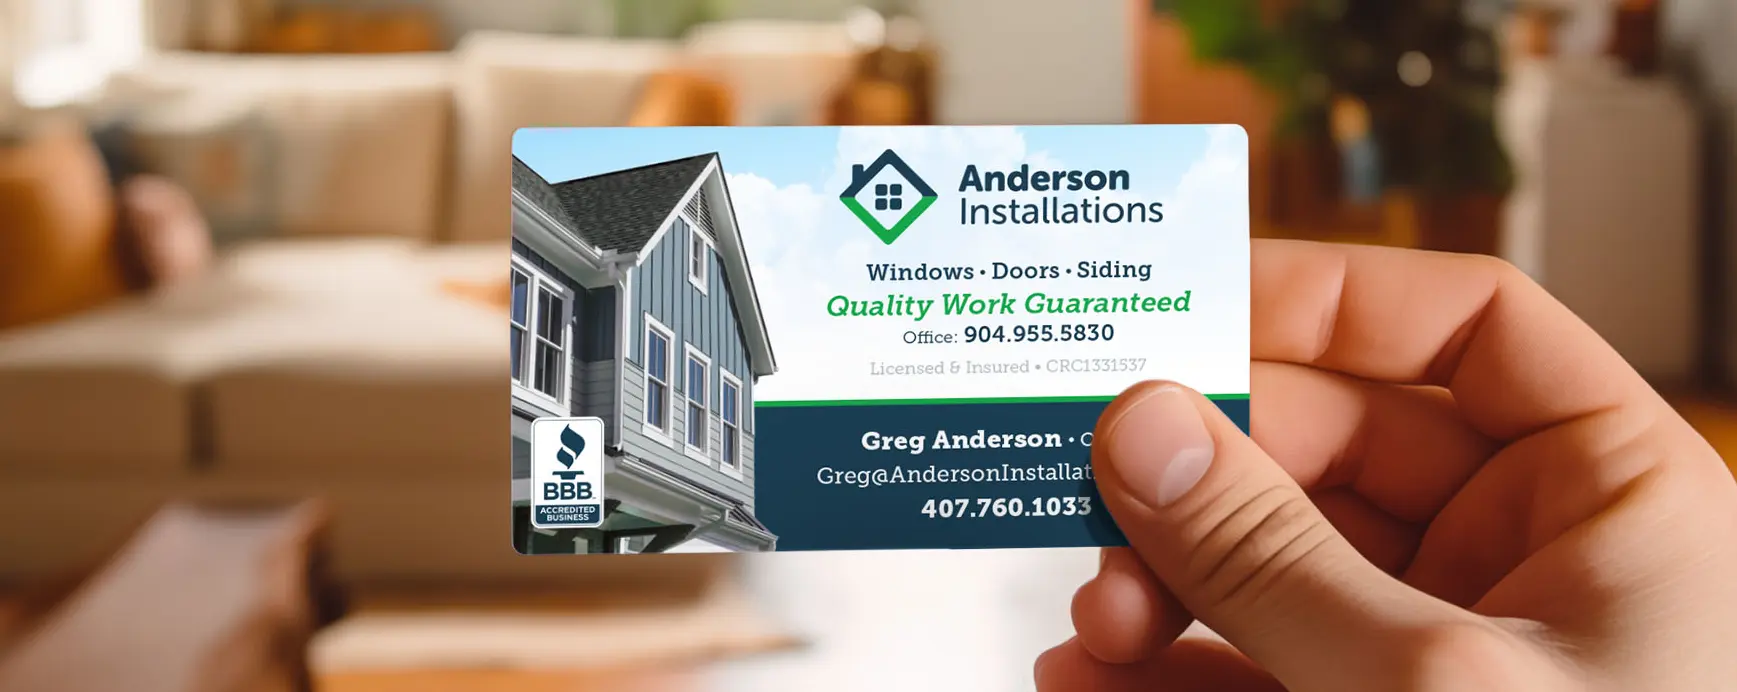 Anderson Installations Business Card